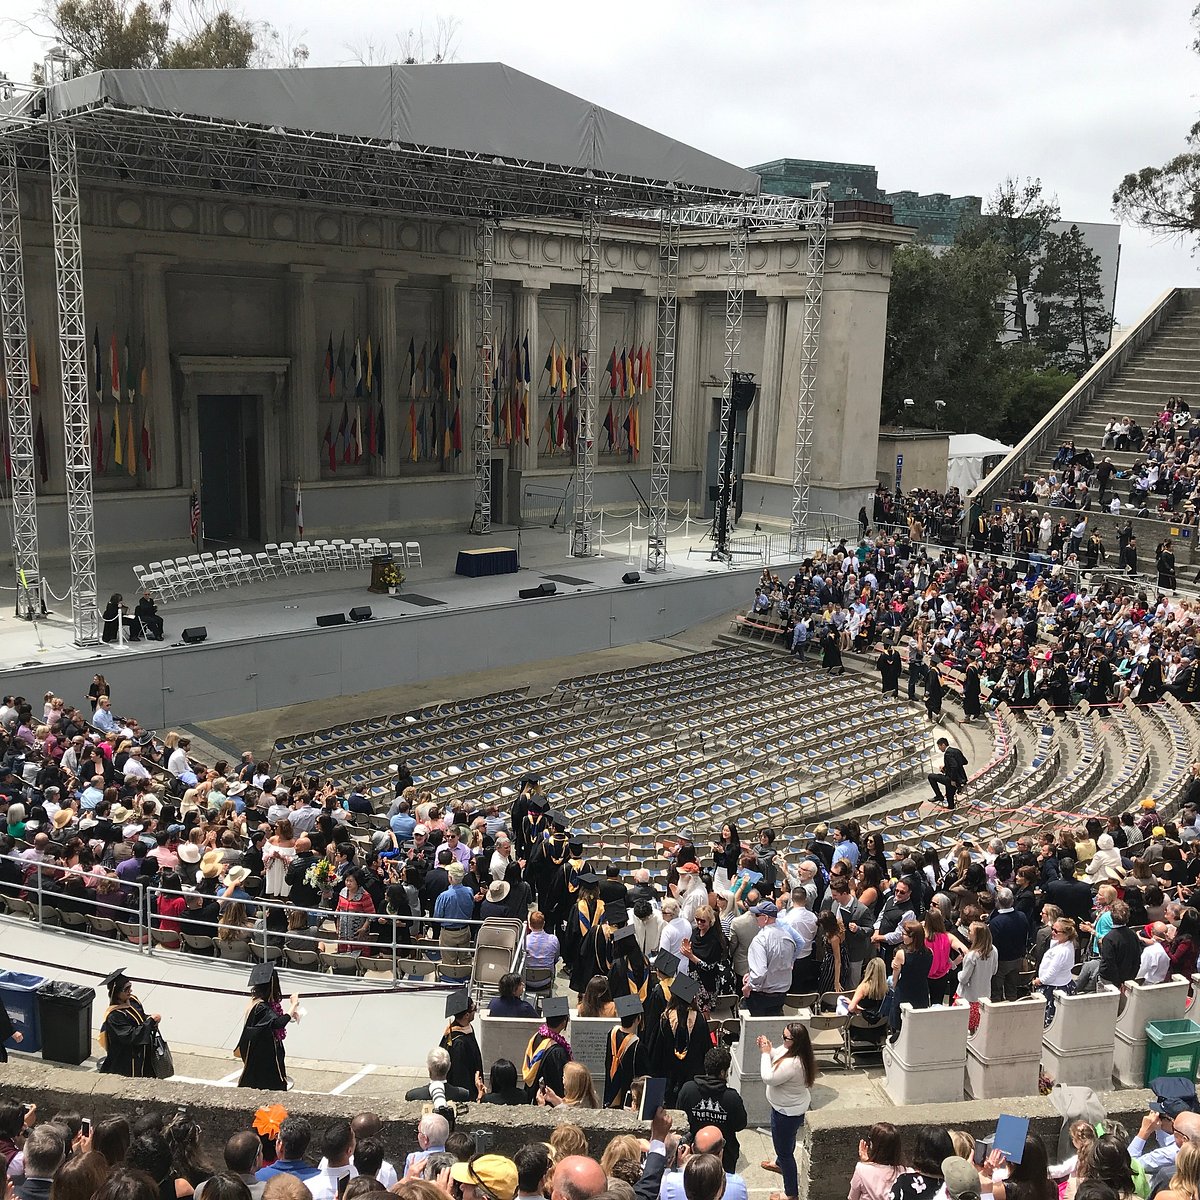 Collection 96+ Images tori kelly @ greek theatre in los angeles, ca, the greek theatre, may 21 Stunning